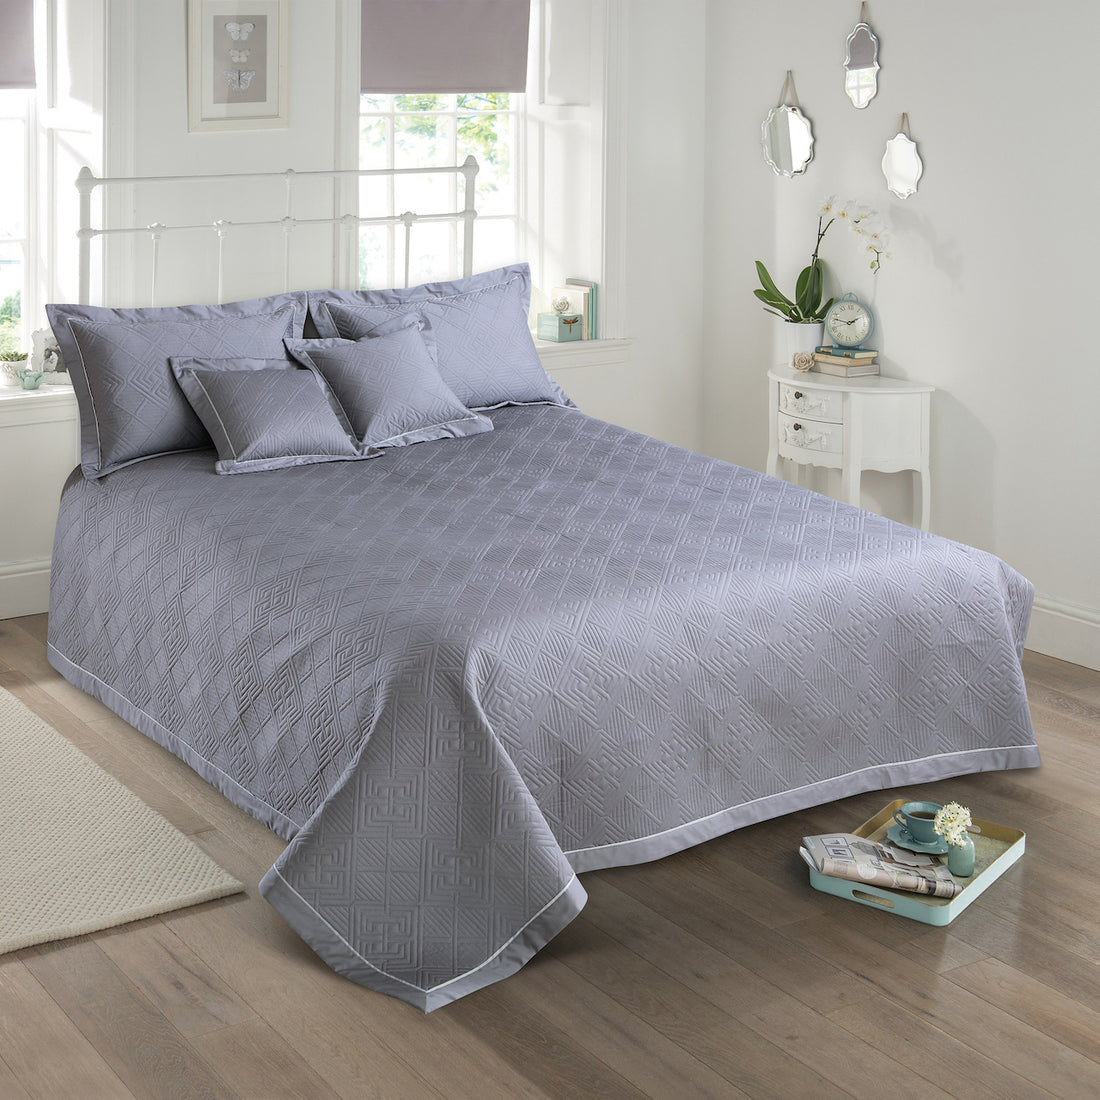 Kairo Quilted Bedcover - Grey